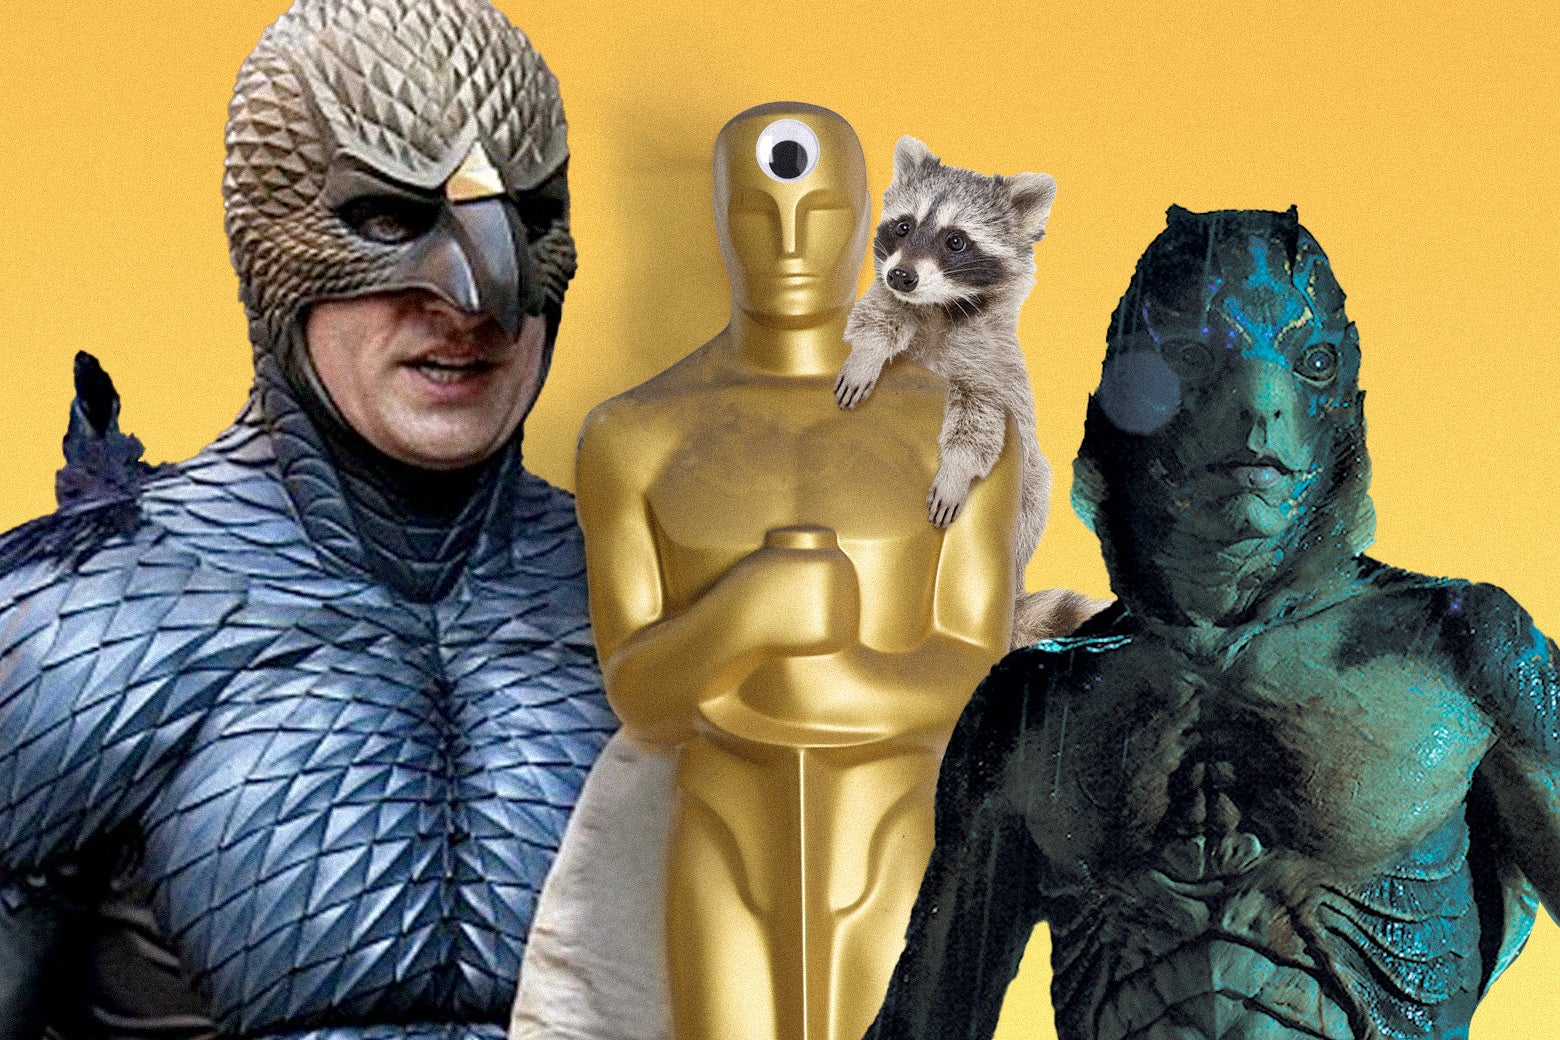 At the center, an Oscar with a googly eye on its head and a raccoon on its shoulder. On the left, the Birdman from Birdman. On the right, the fishman from The Shape of Water.